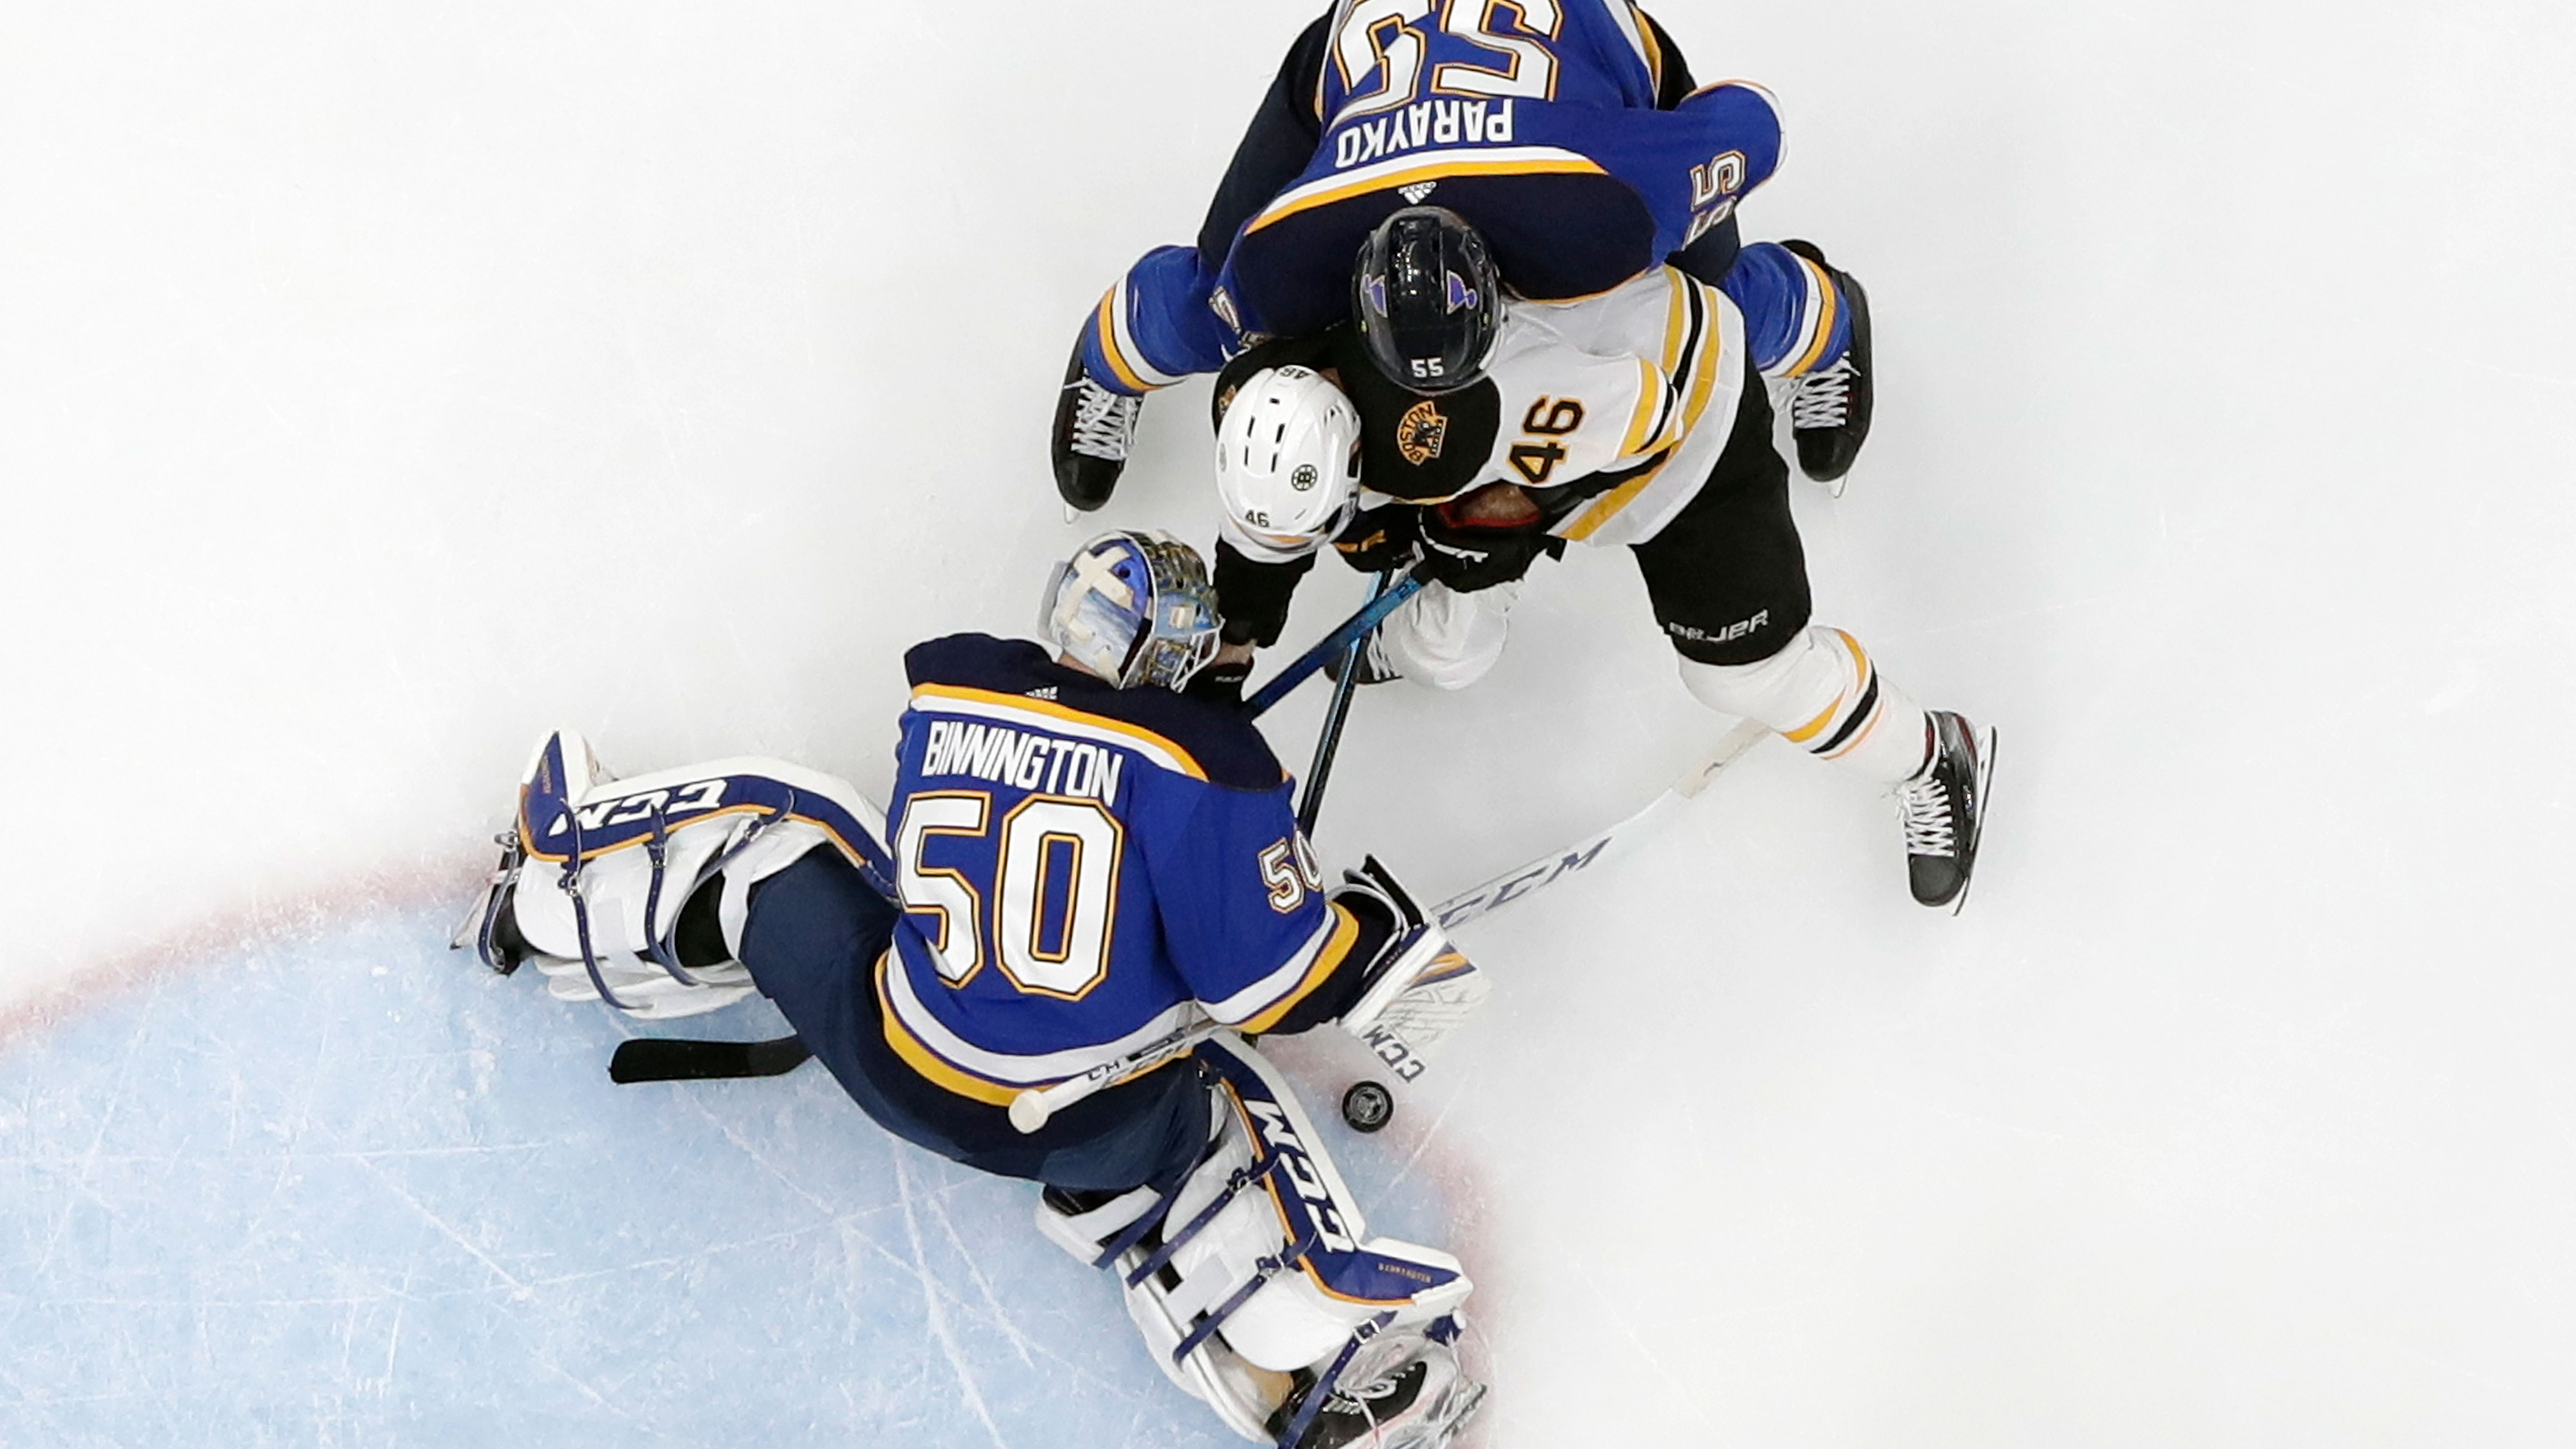 Blues won't win Cup on home ice after 5-1 loss, Bruins force Game 7